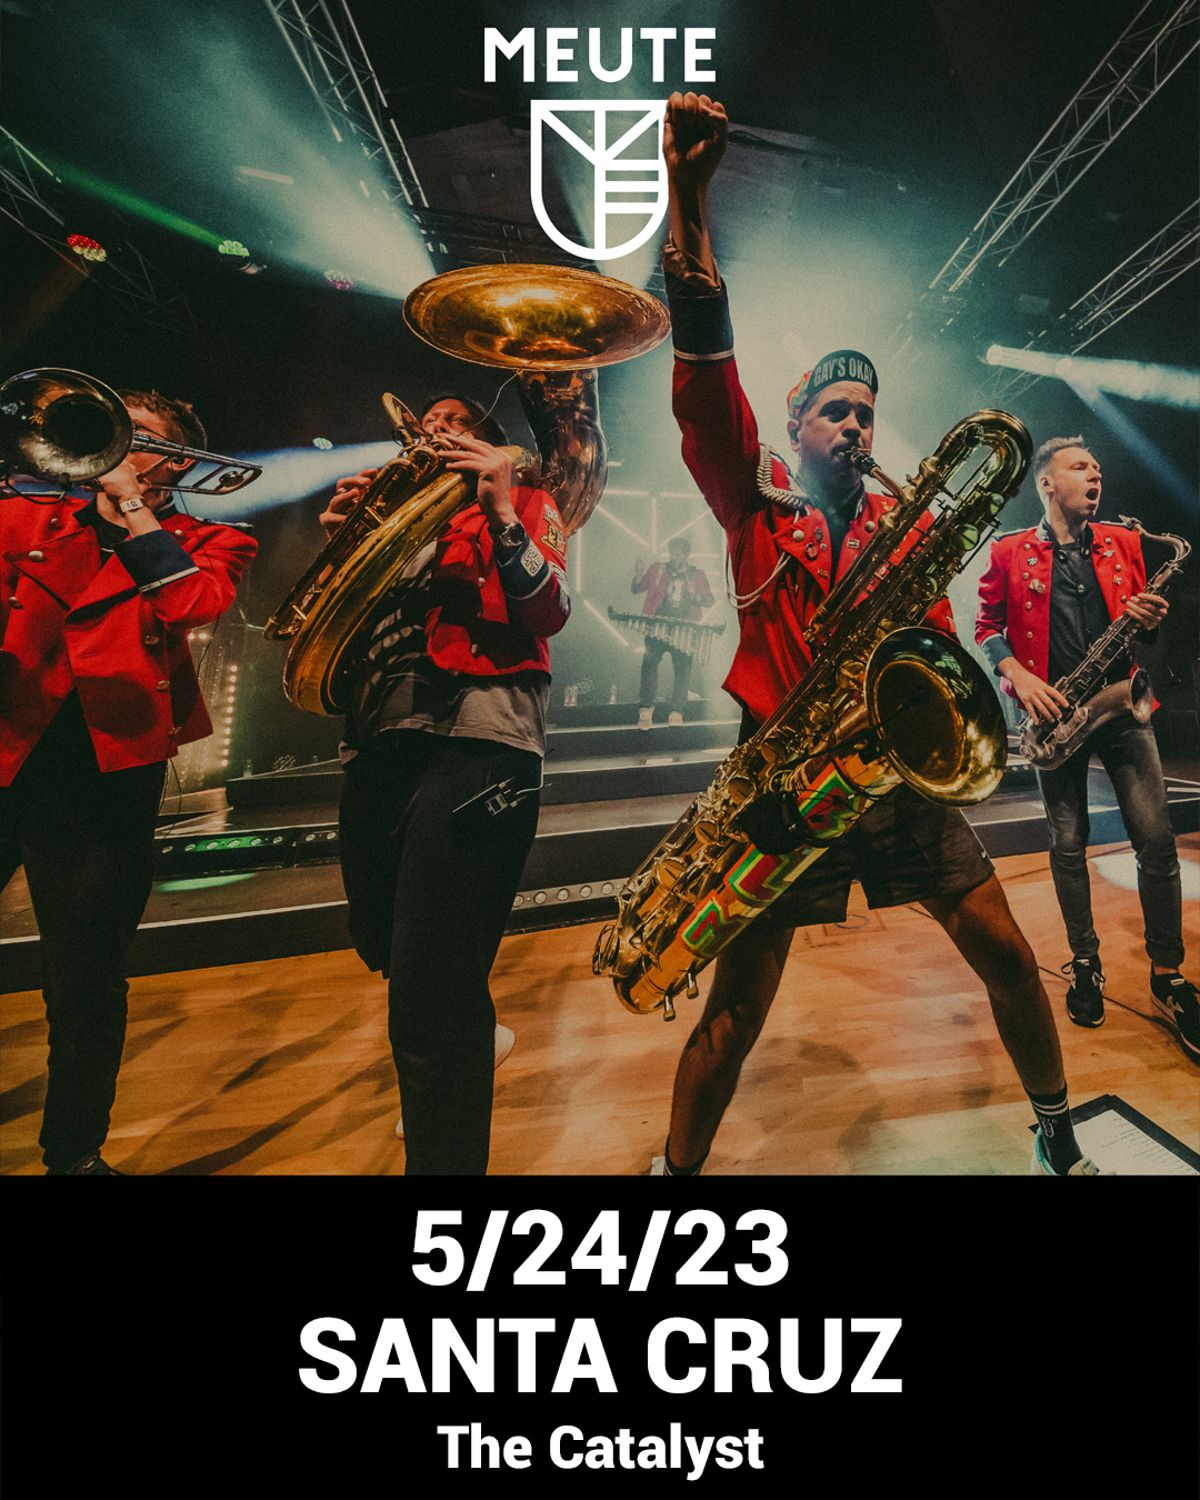 MEUTE Ages 16 and up WEDNESDAY, MAY 24 Doors: 7pm Show: 8pm $22 to $27 Tickets $17 Early Bird/ $22 General Admission/ $27 Last Chance